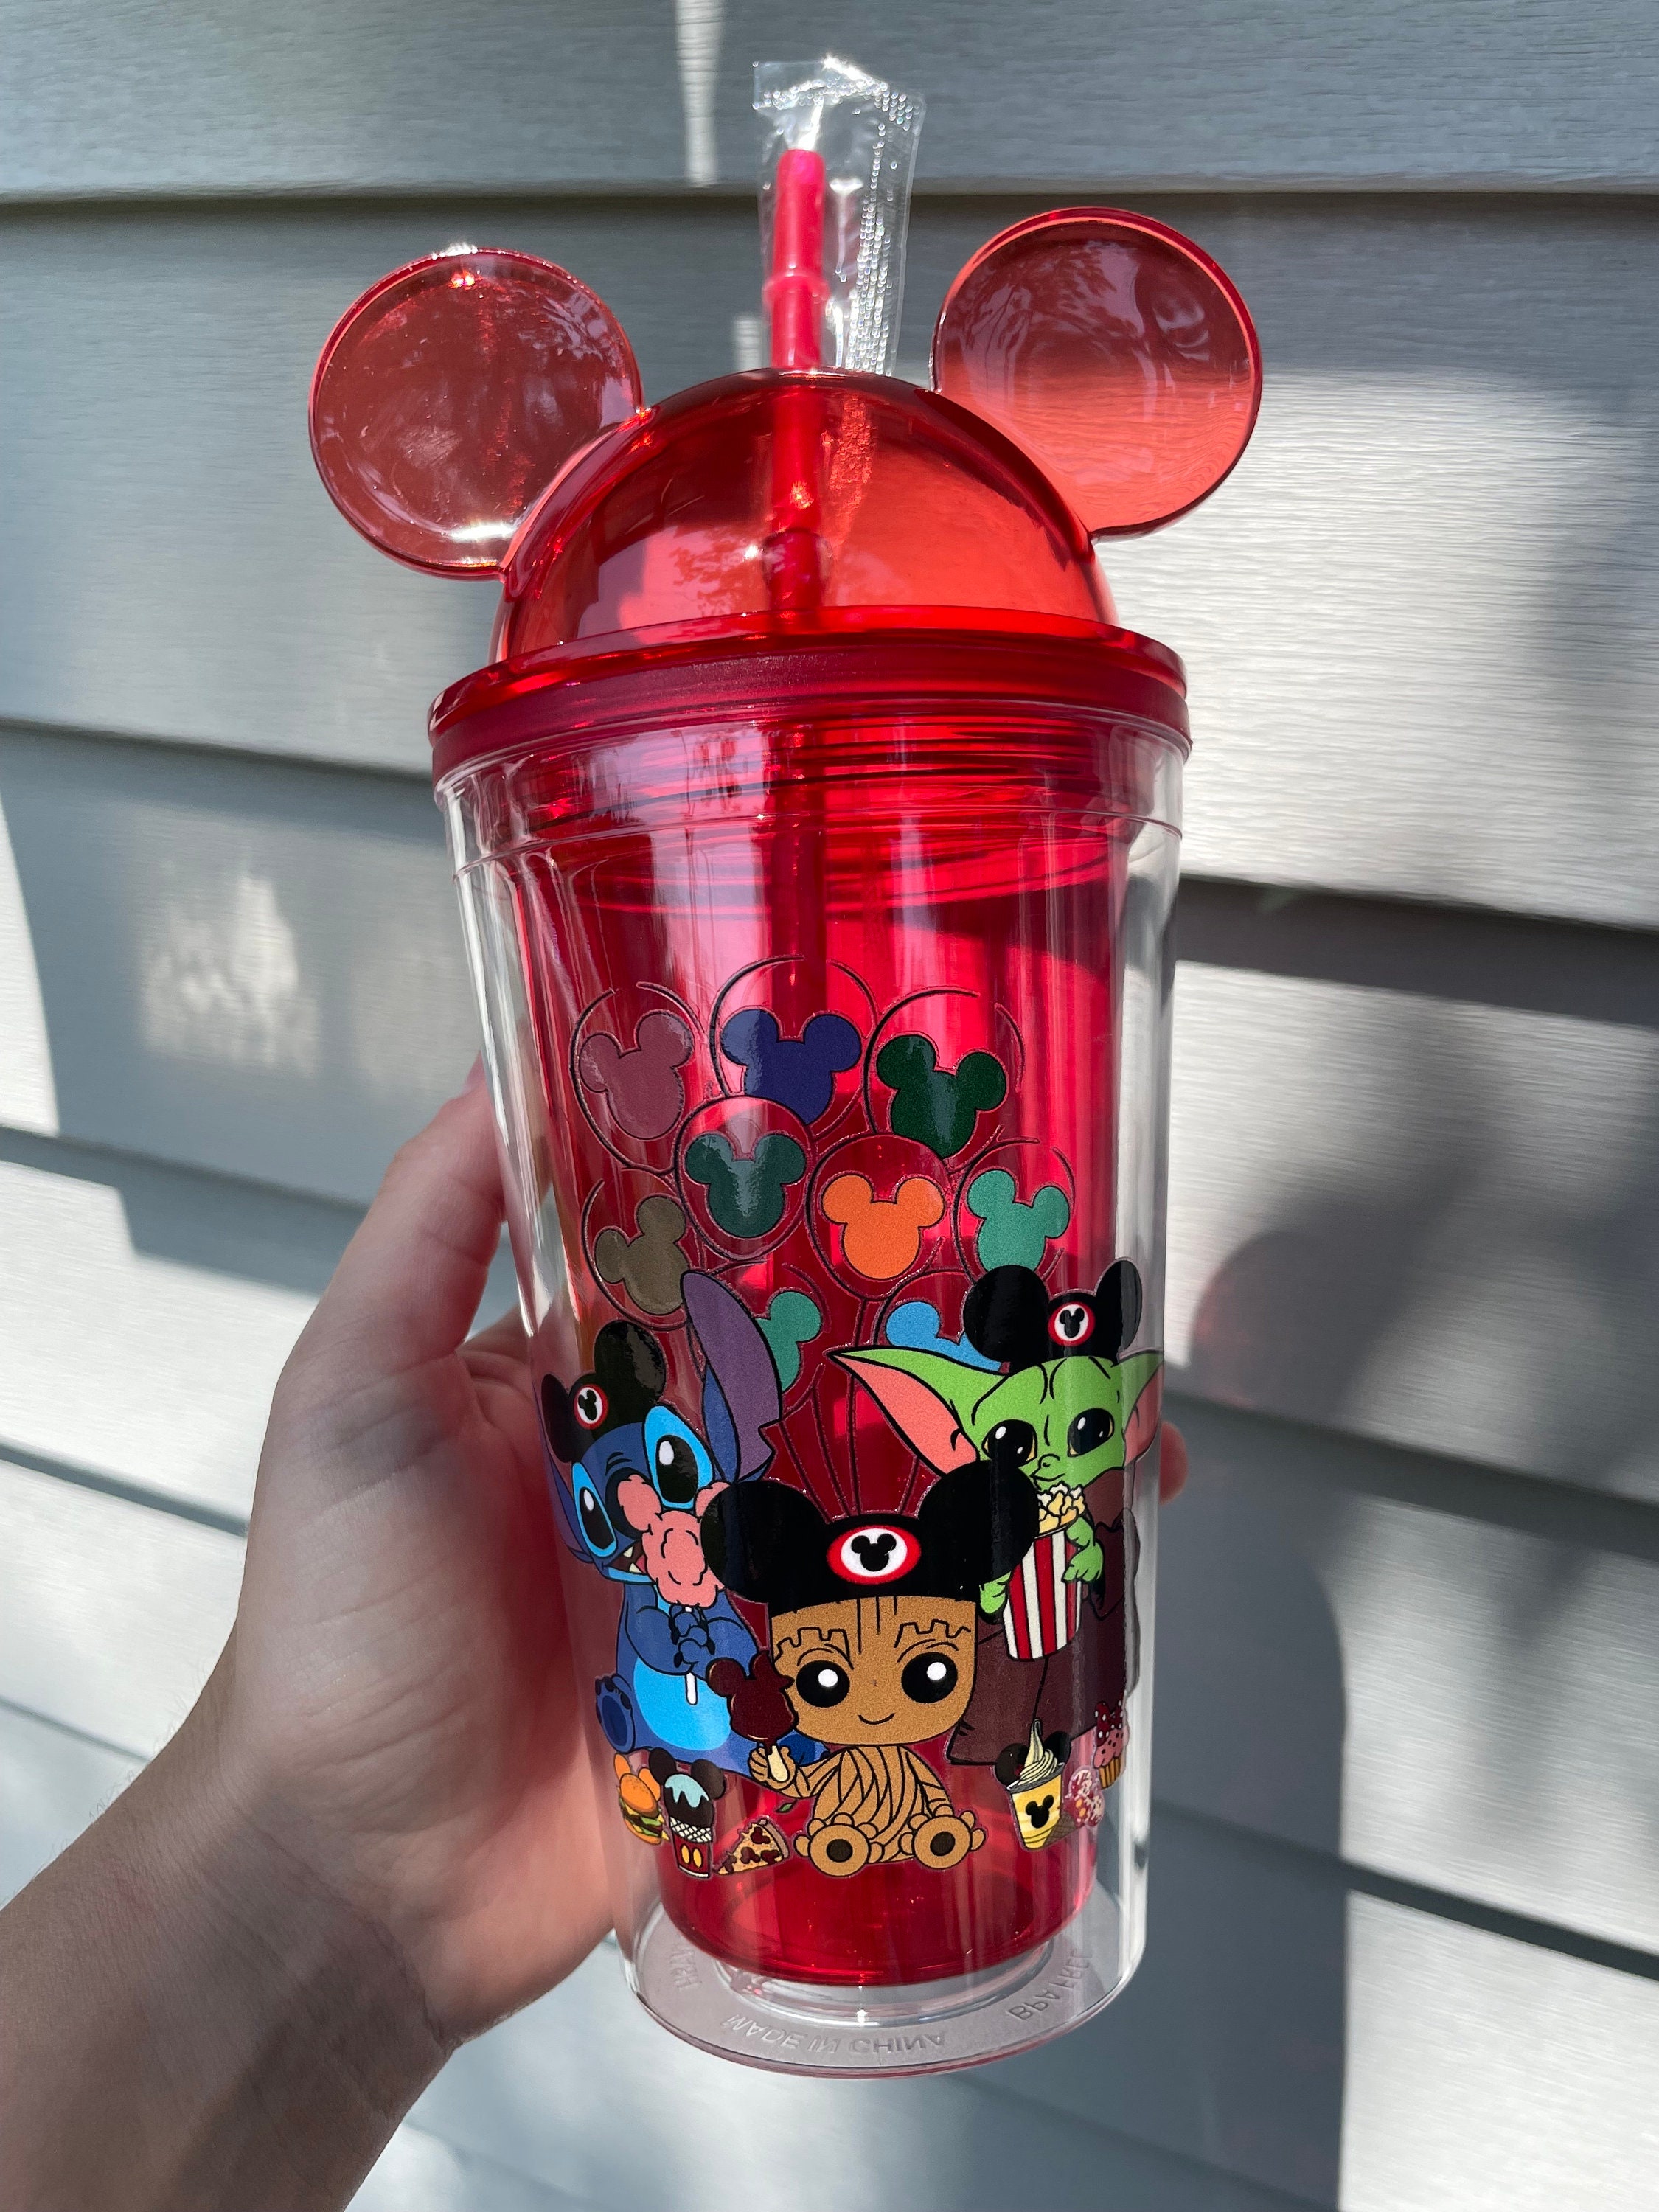 24 Pieces Disney's Mickey's Clubhouse Acrylic Silly Straw Tumblers -  Plastic Drinkware - at 